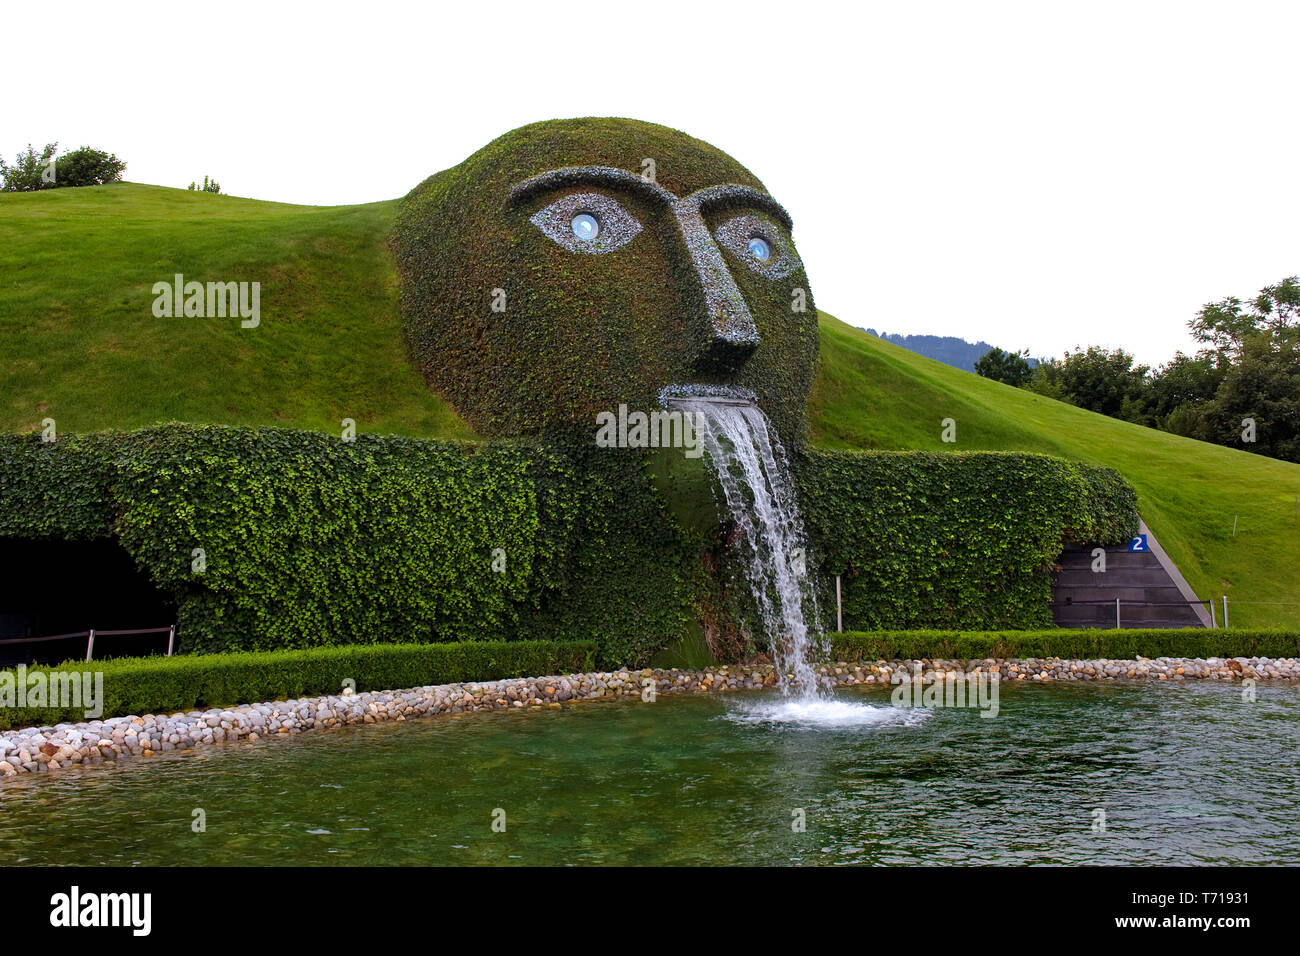 Wattens, Tyrol/ Austria: The Giant is a fountain created  by austrian artist André Heller, located at the entrance to the Swarovski Crystal Worlds Stock Photo